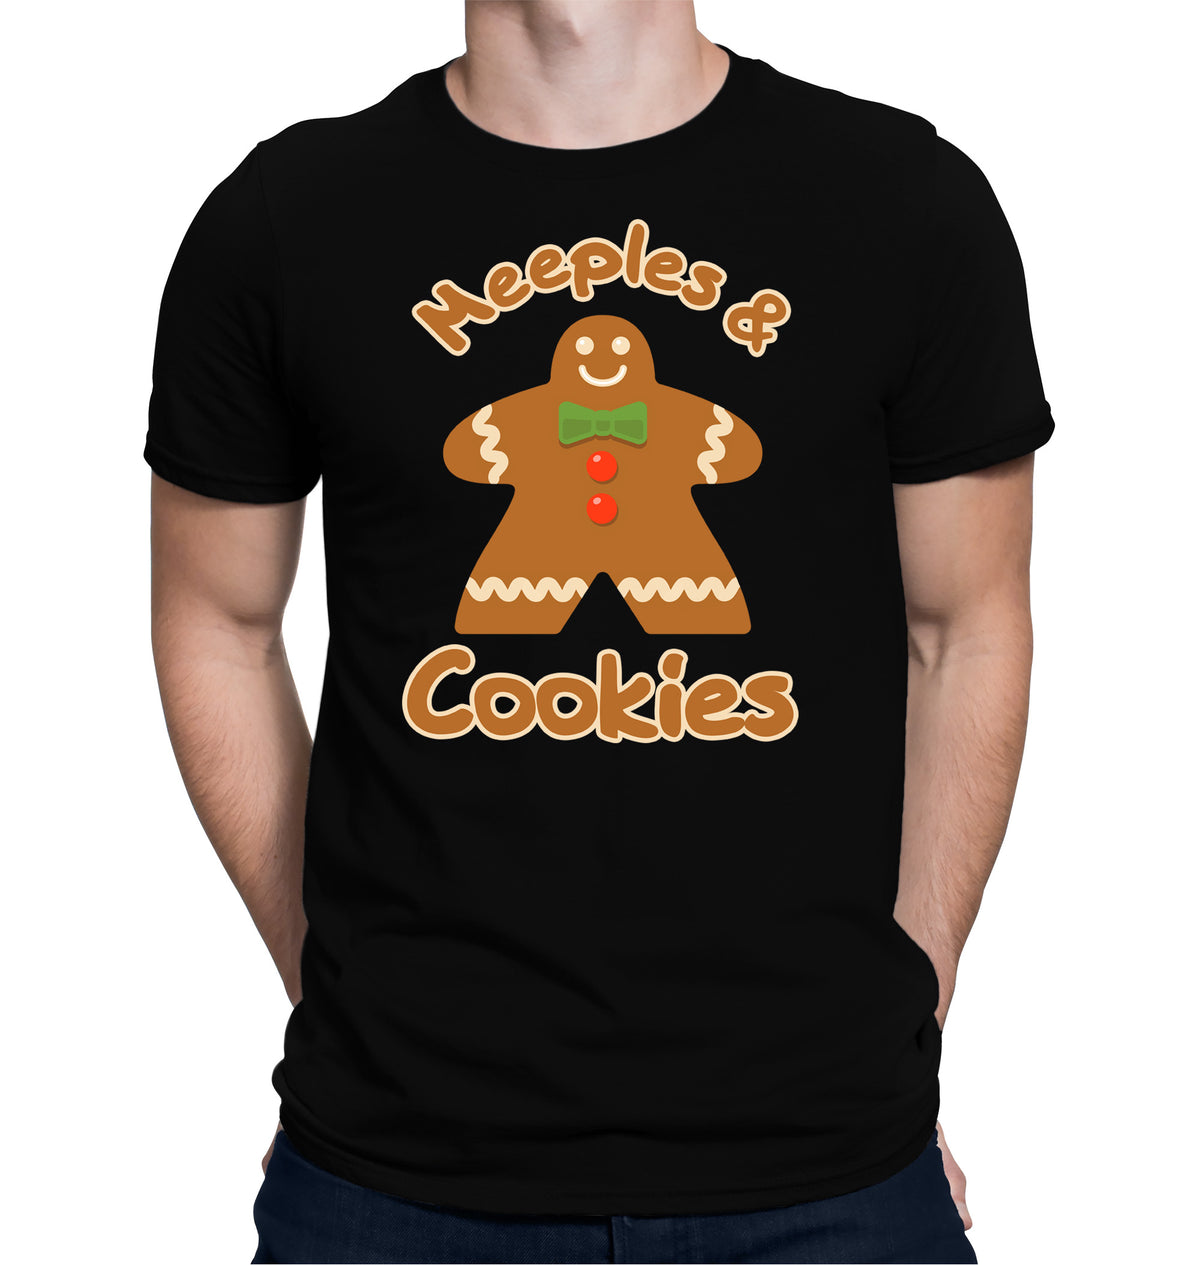 Meeples and Cookies Board Game T-Shirt